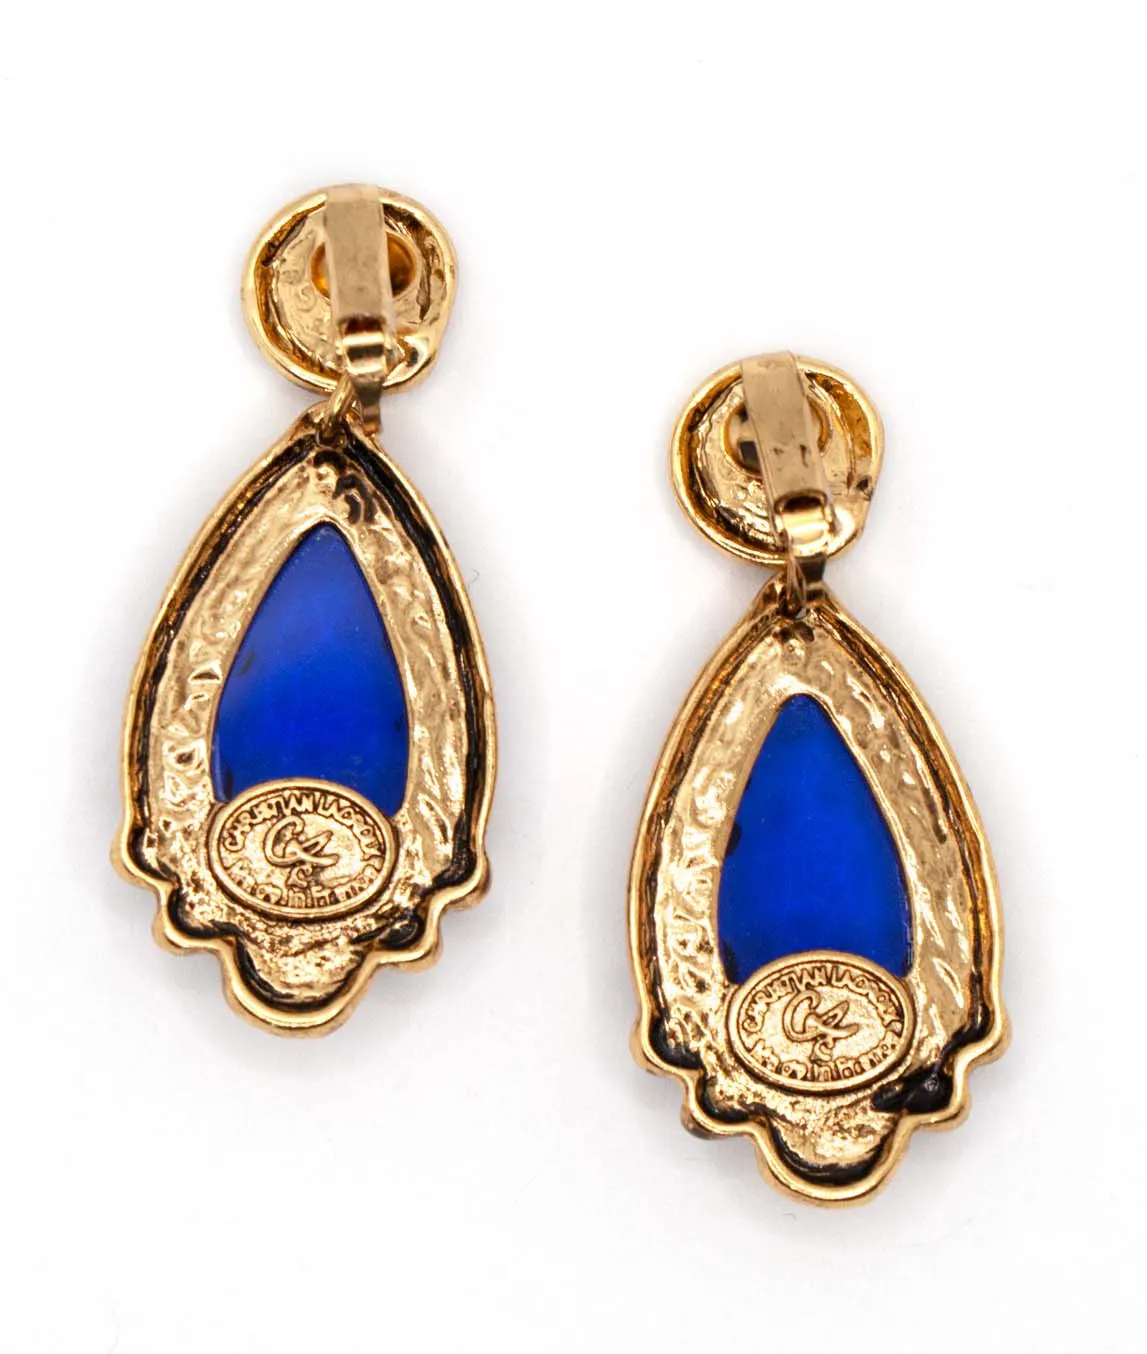 Back of blue and gold Christian Lacroix earrings